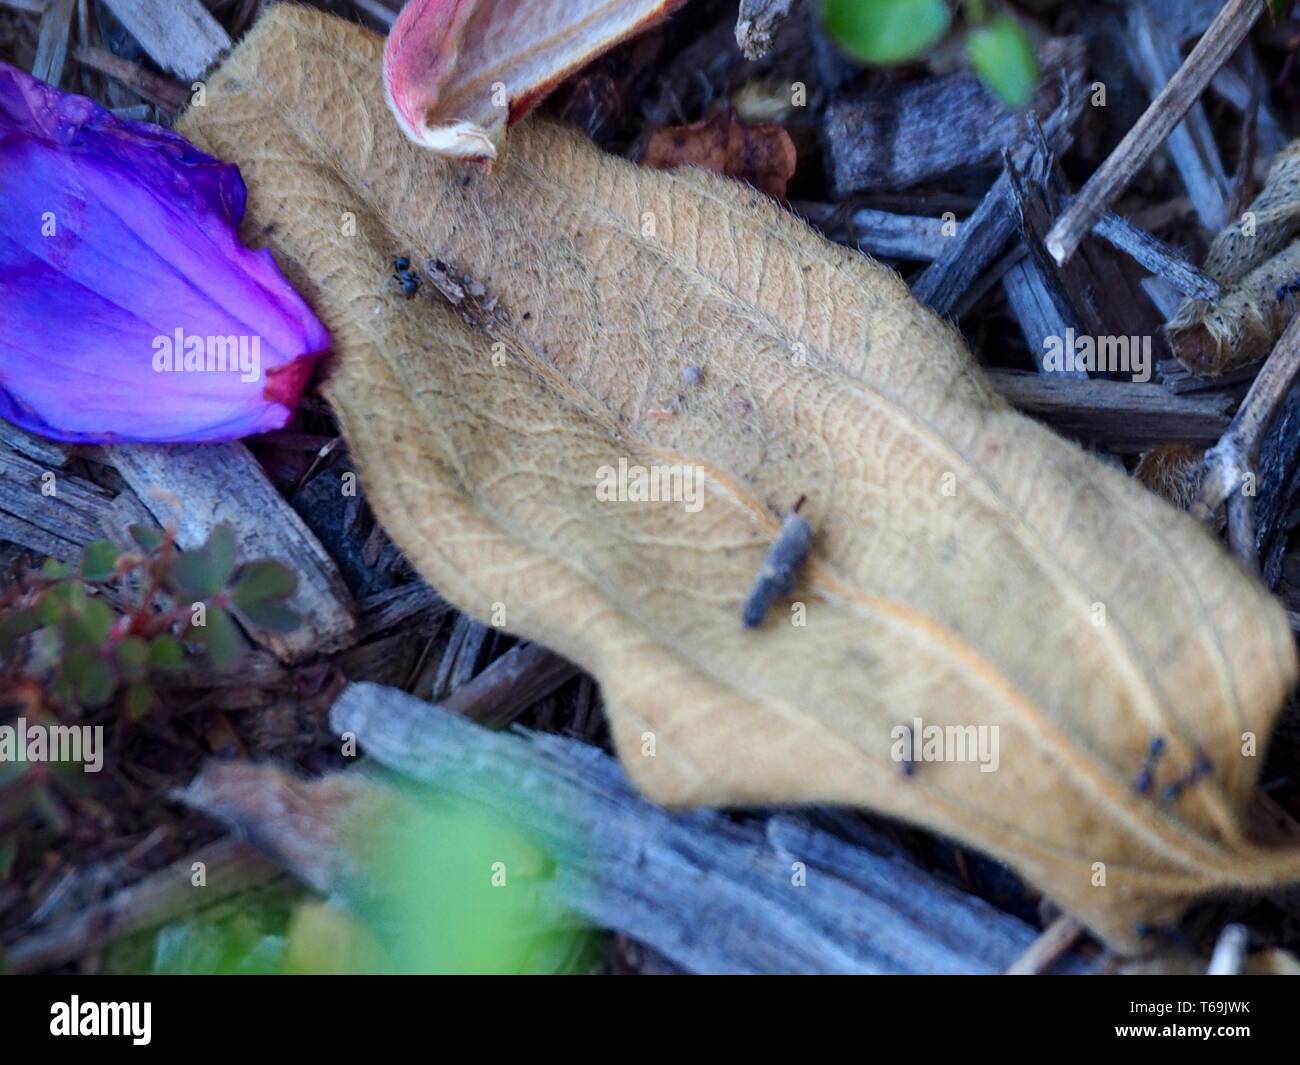 Natural litter on the ground, consisting of bark chips, leaves, weeds and rich purple Tibouchina petals Stock Photo